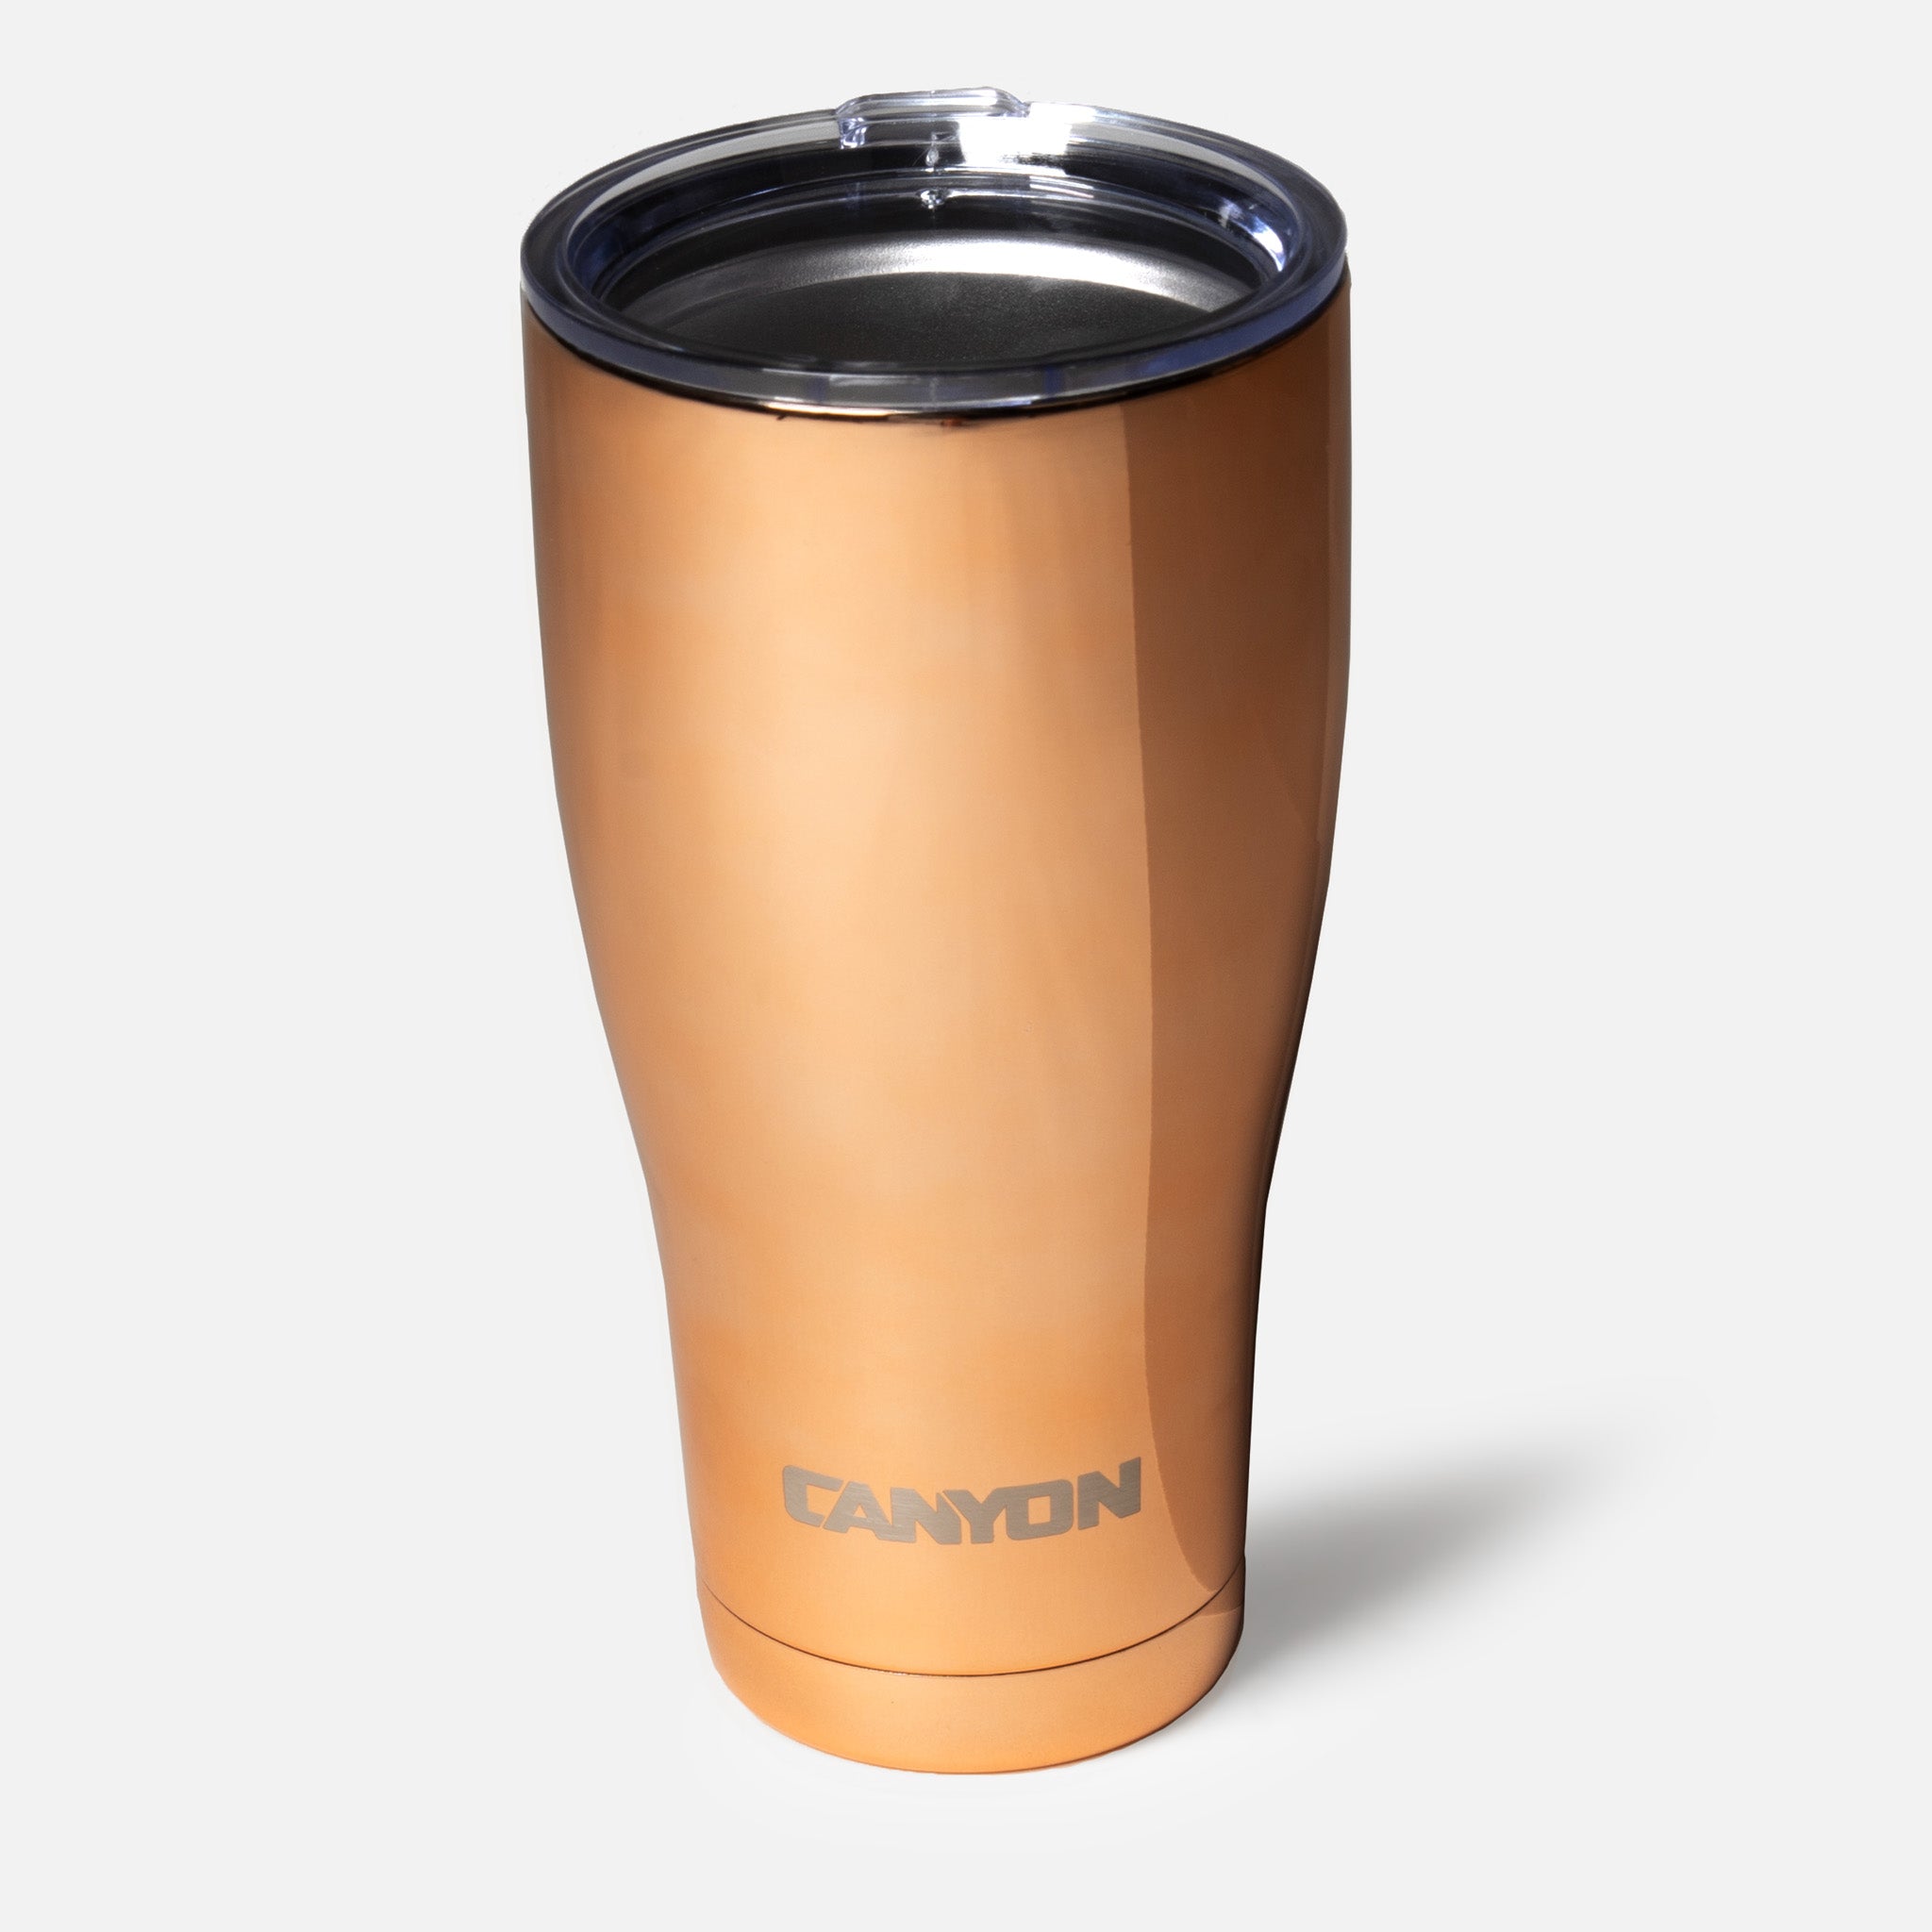 Tumbler Copper Plated 30oz - Canyon Coolers